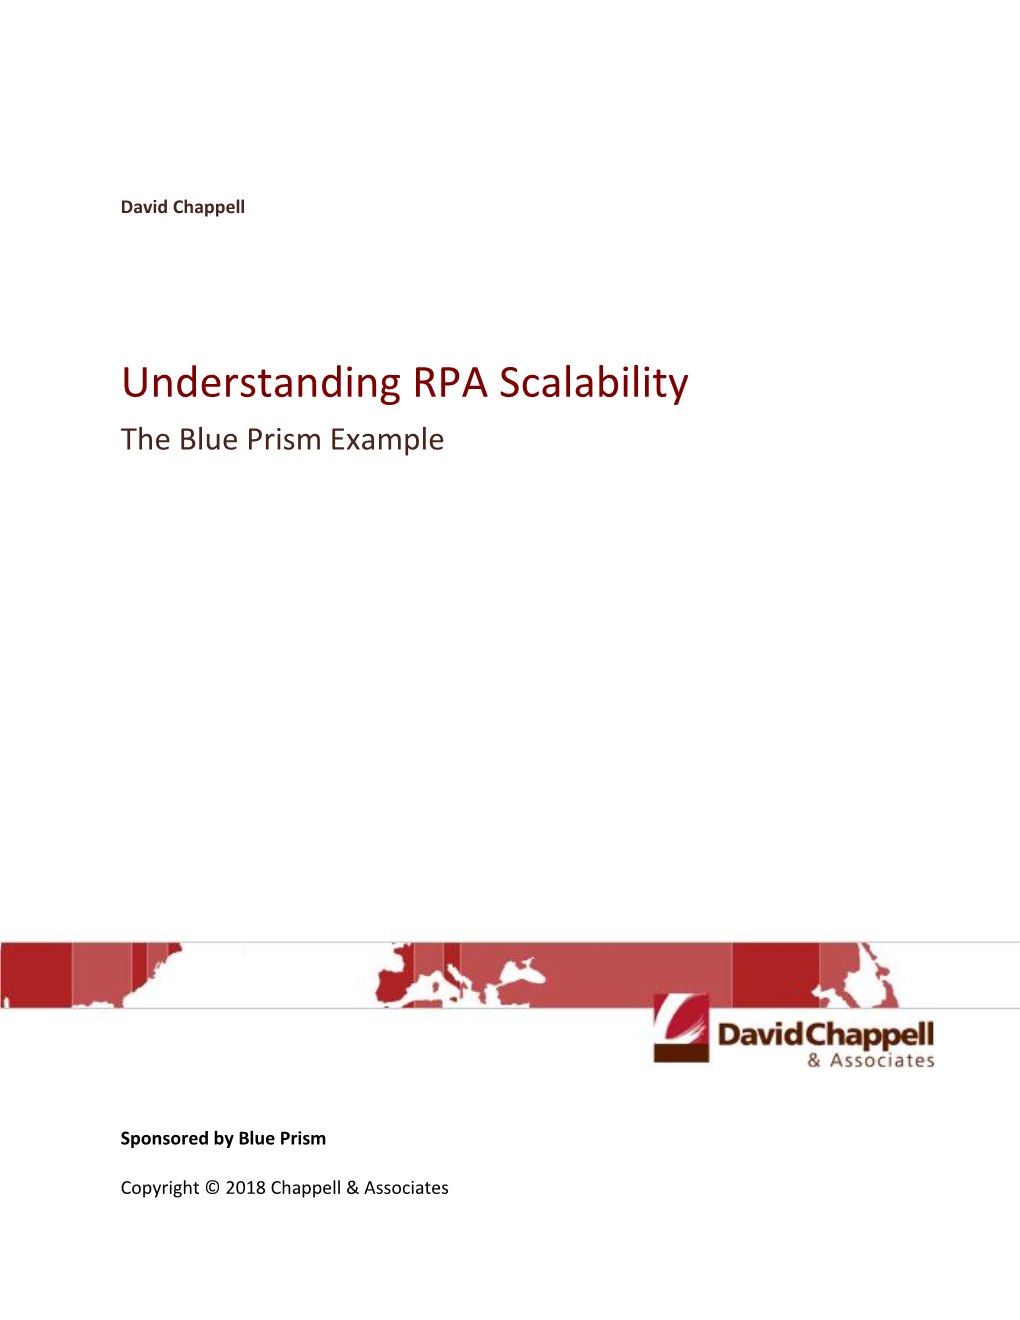 Understanding RPA Scalability: the Blue Prism Example